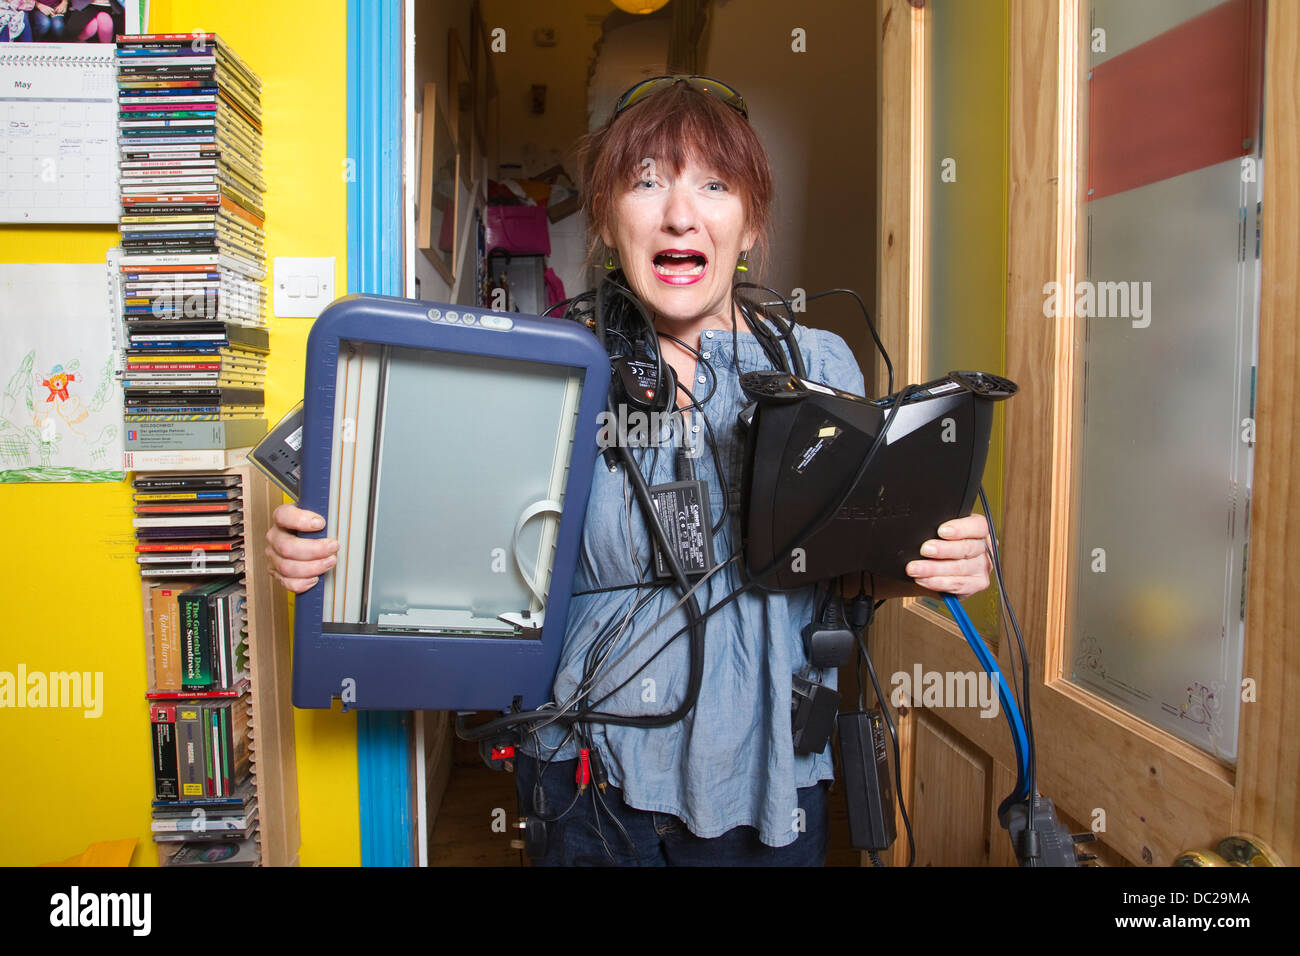 Woman with technophobia struggling with electronic devices at home, London, UK Stock Photo